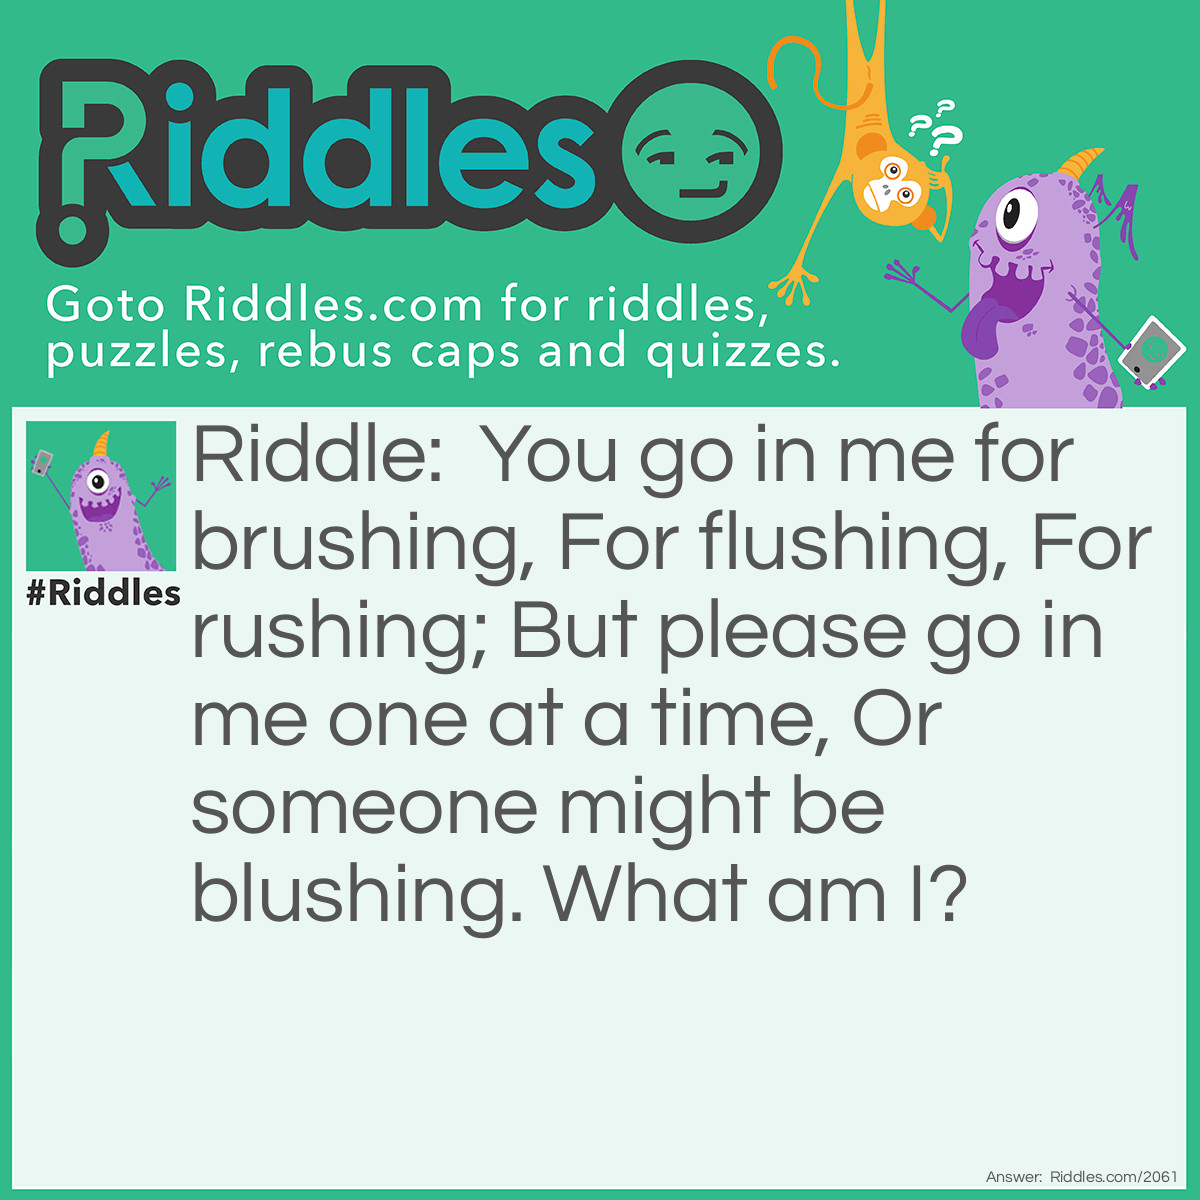 Riddle: You go in me for brushing,
For flushing,
For rushing;
But please go in me one at a time,
Or someone might be blushing.
What am I? Answer: A bathroom.